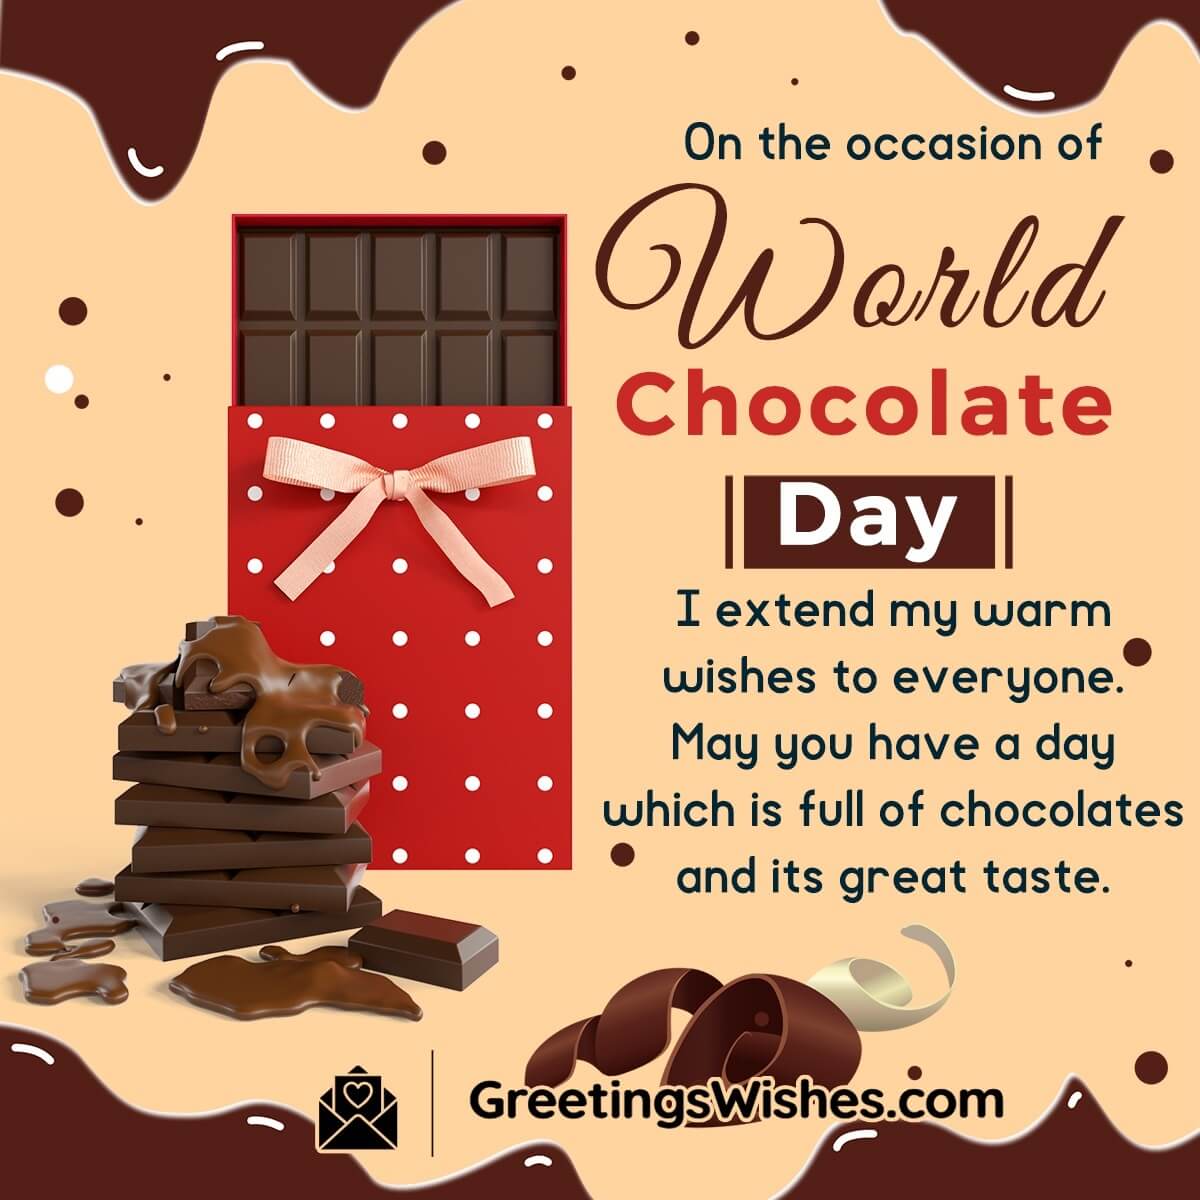 World Chocolate Day Wishes Messages